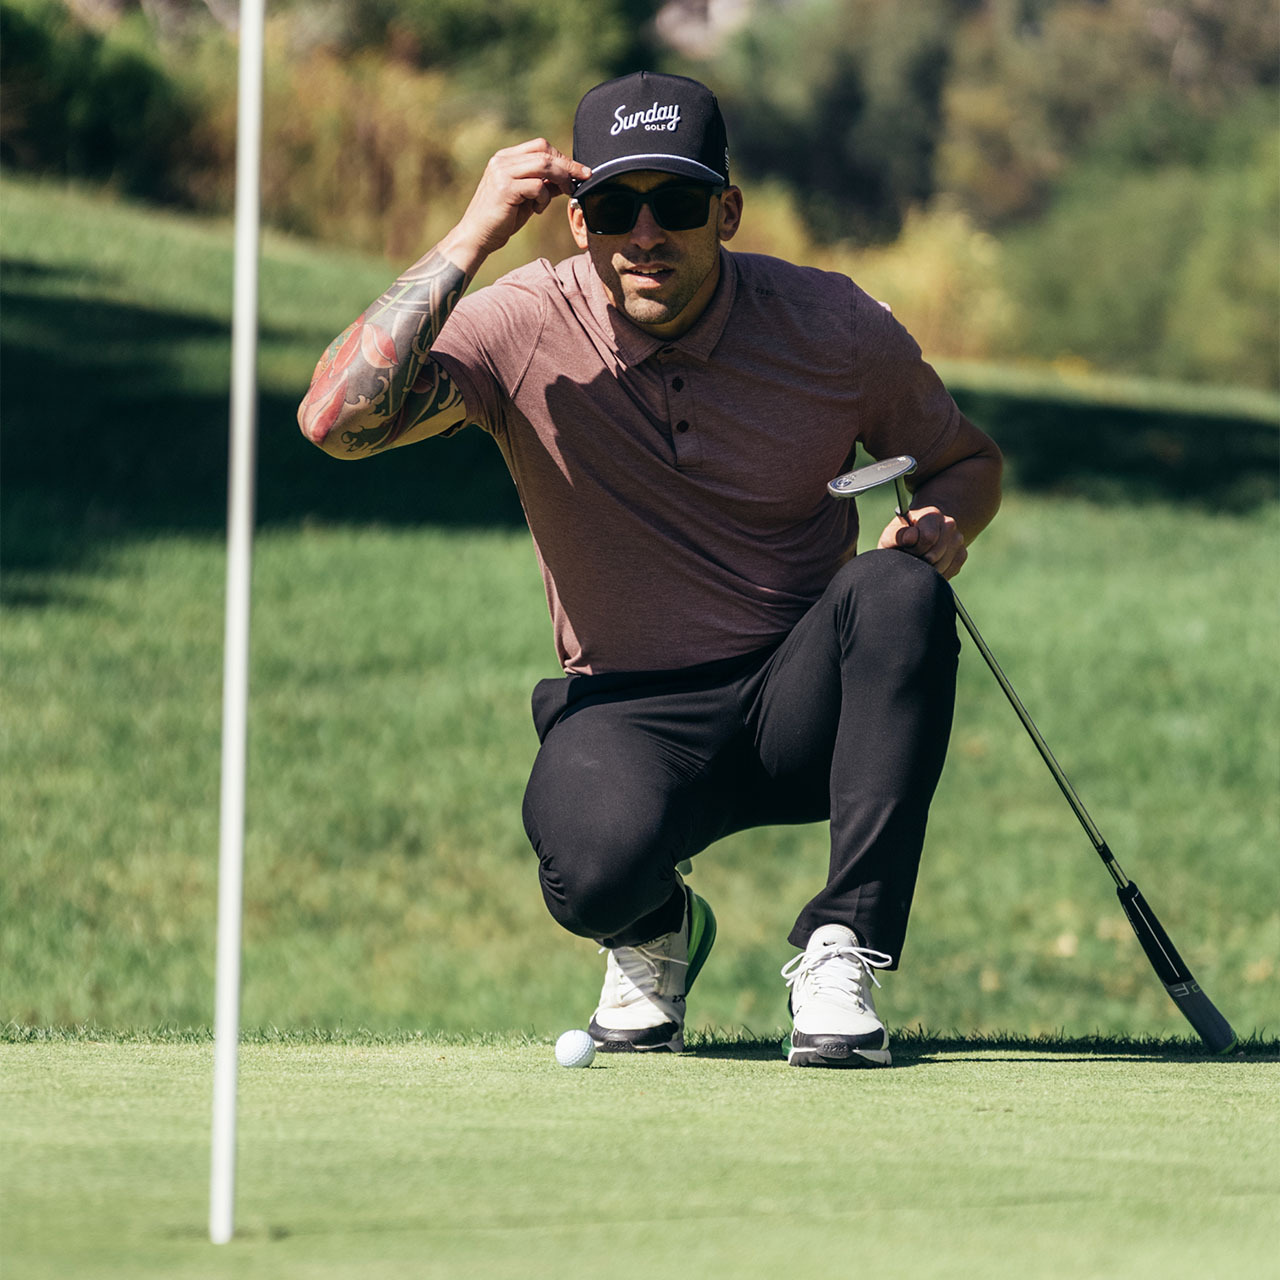 man trying to read the green to find out, are polarized golf sunglasses better for golf